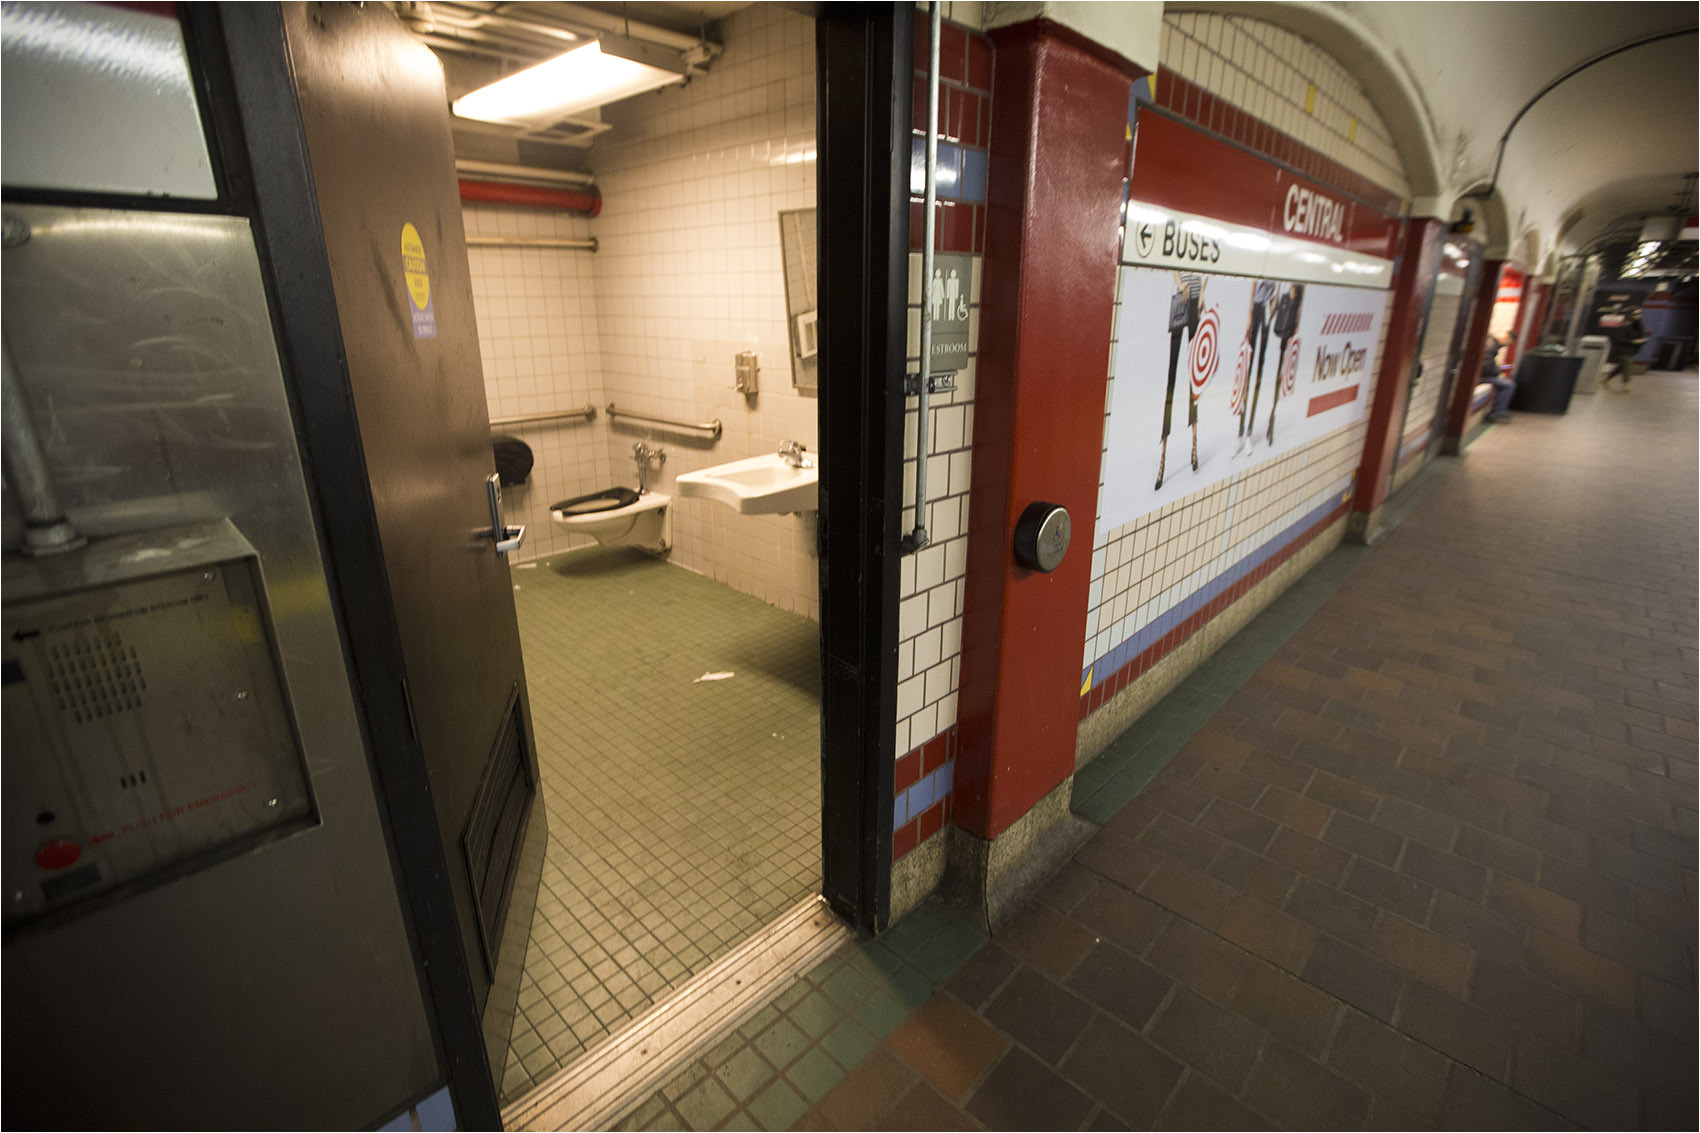 a public restroom on the platform of the central square mbta station which drug users have